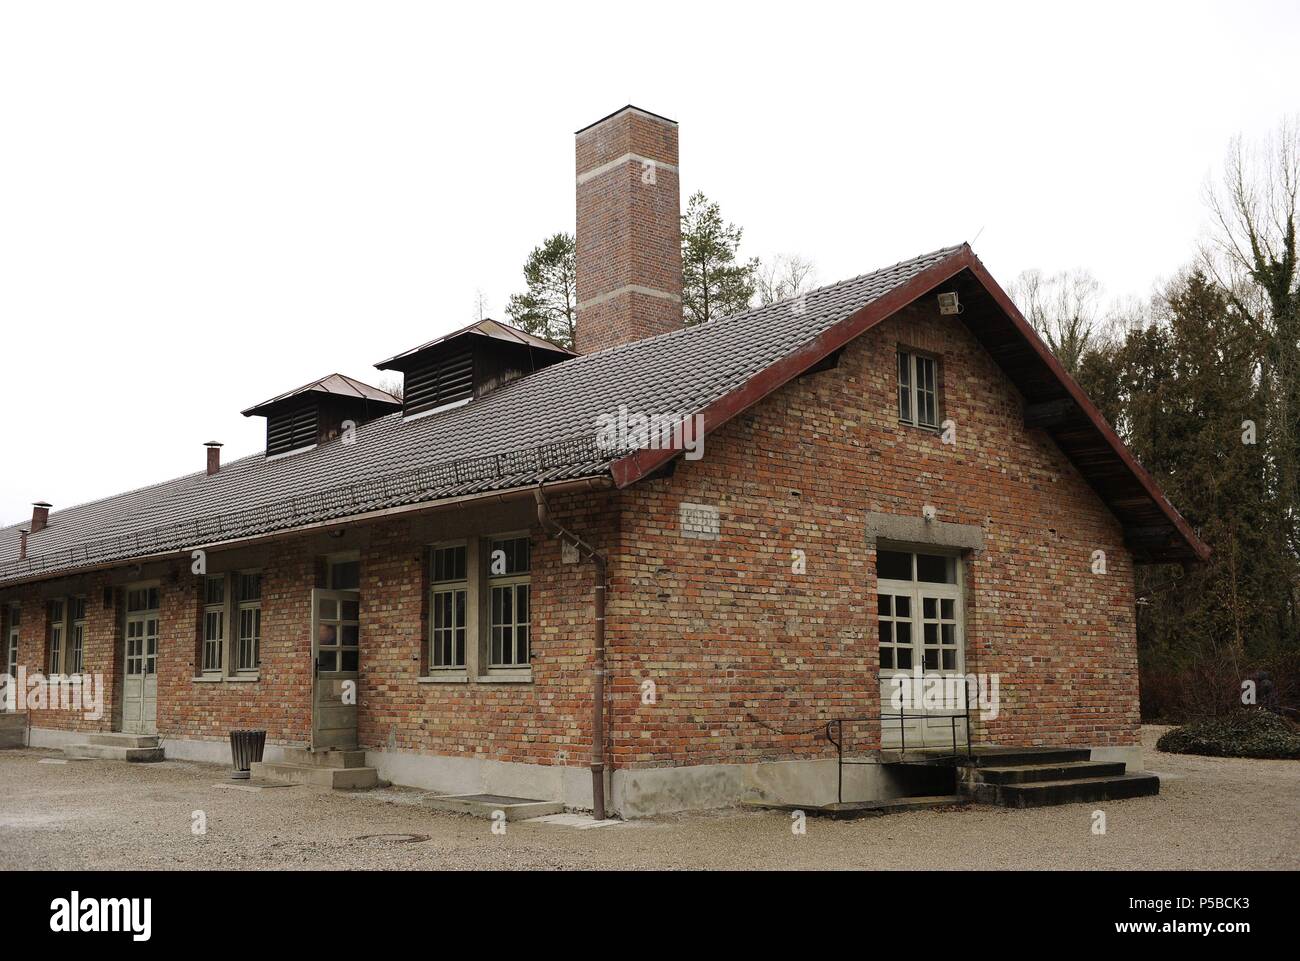 Dachau Concentration Camp. Nazi camp of prisoners opened in 1933. Barrack X. Building where are the crematoria and gas chambers. 1942-1943. Exterior. Germany. Stock Photo